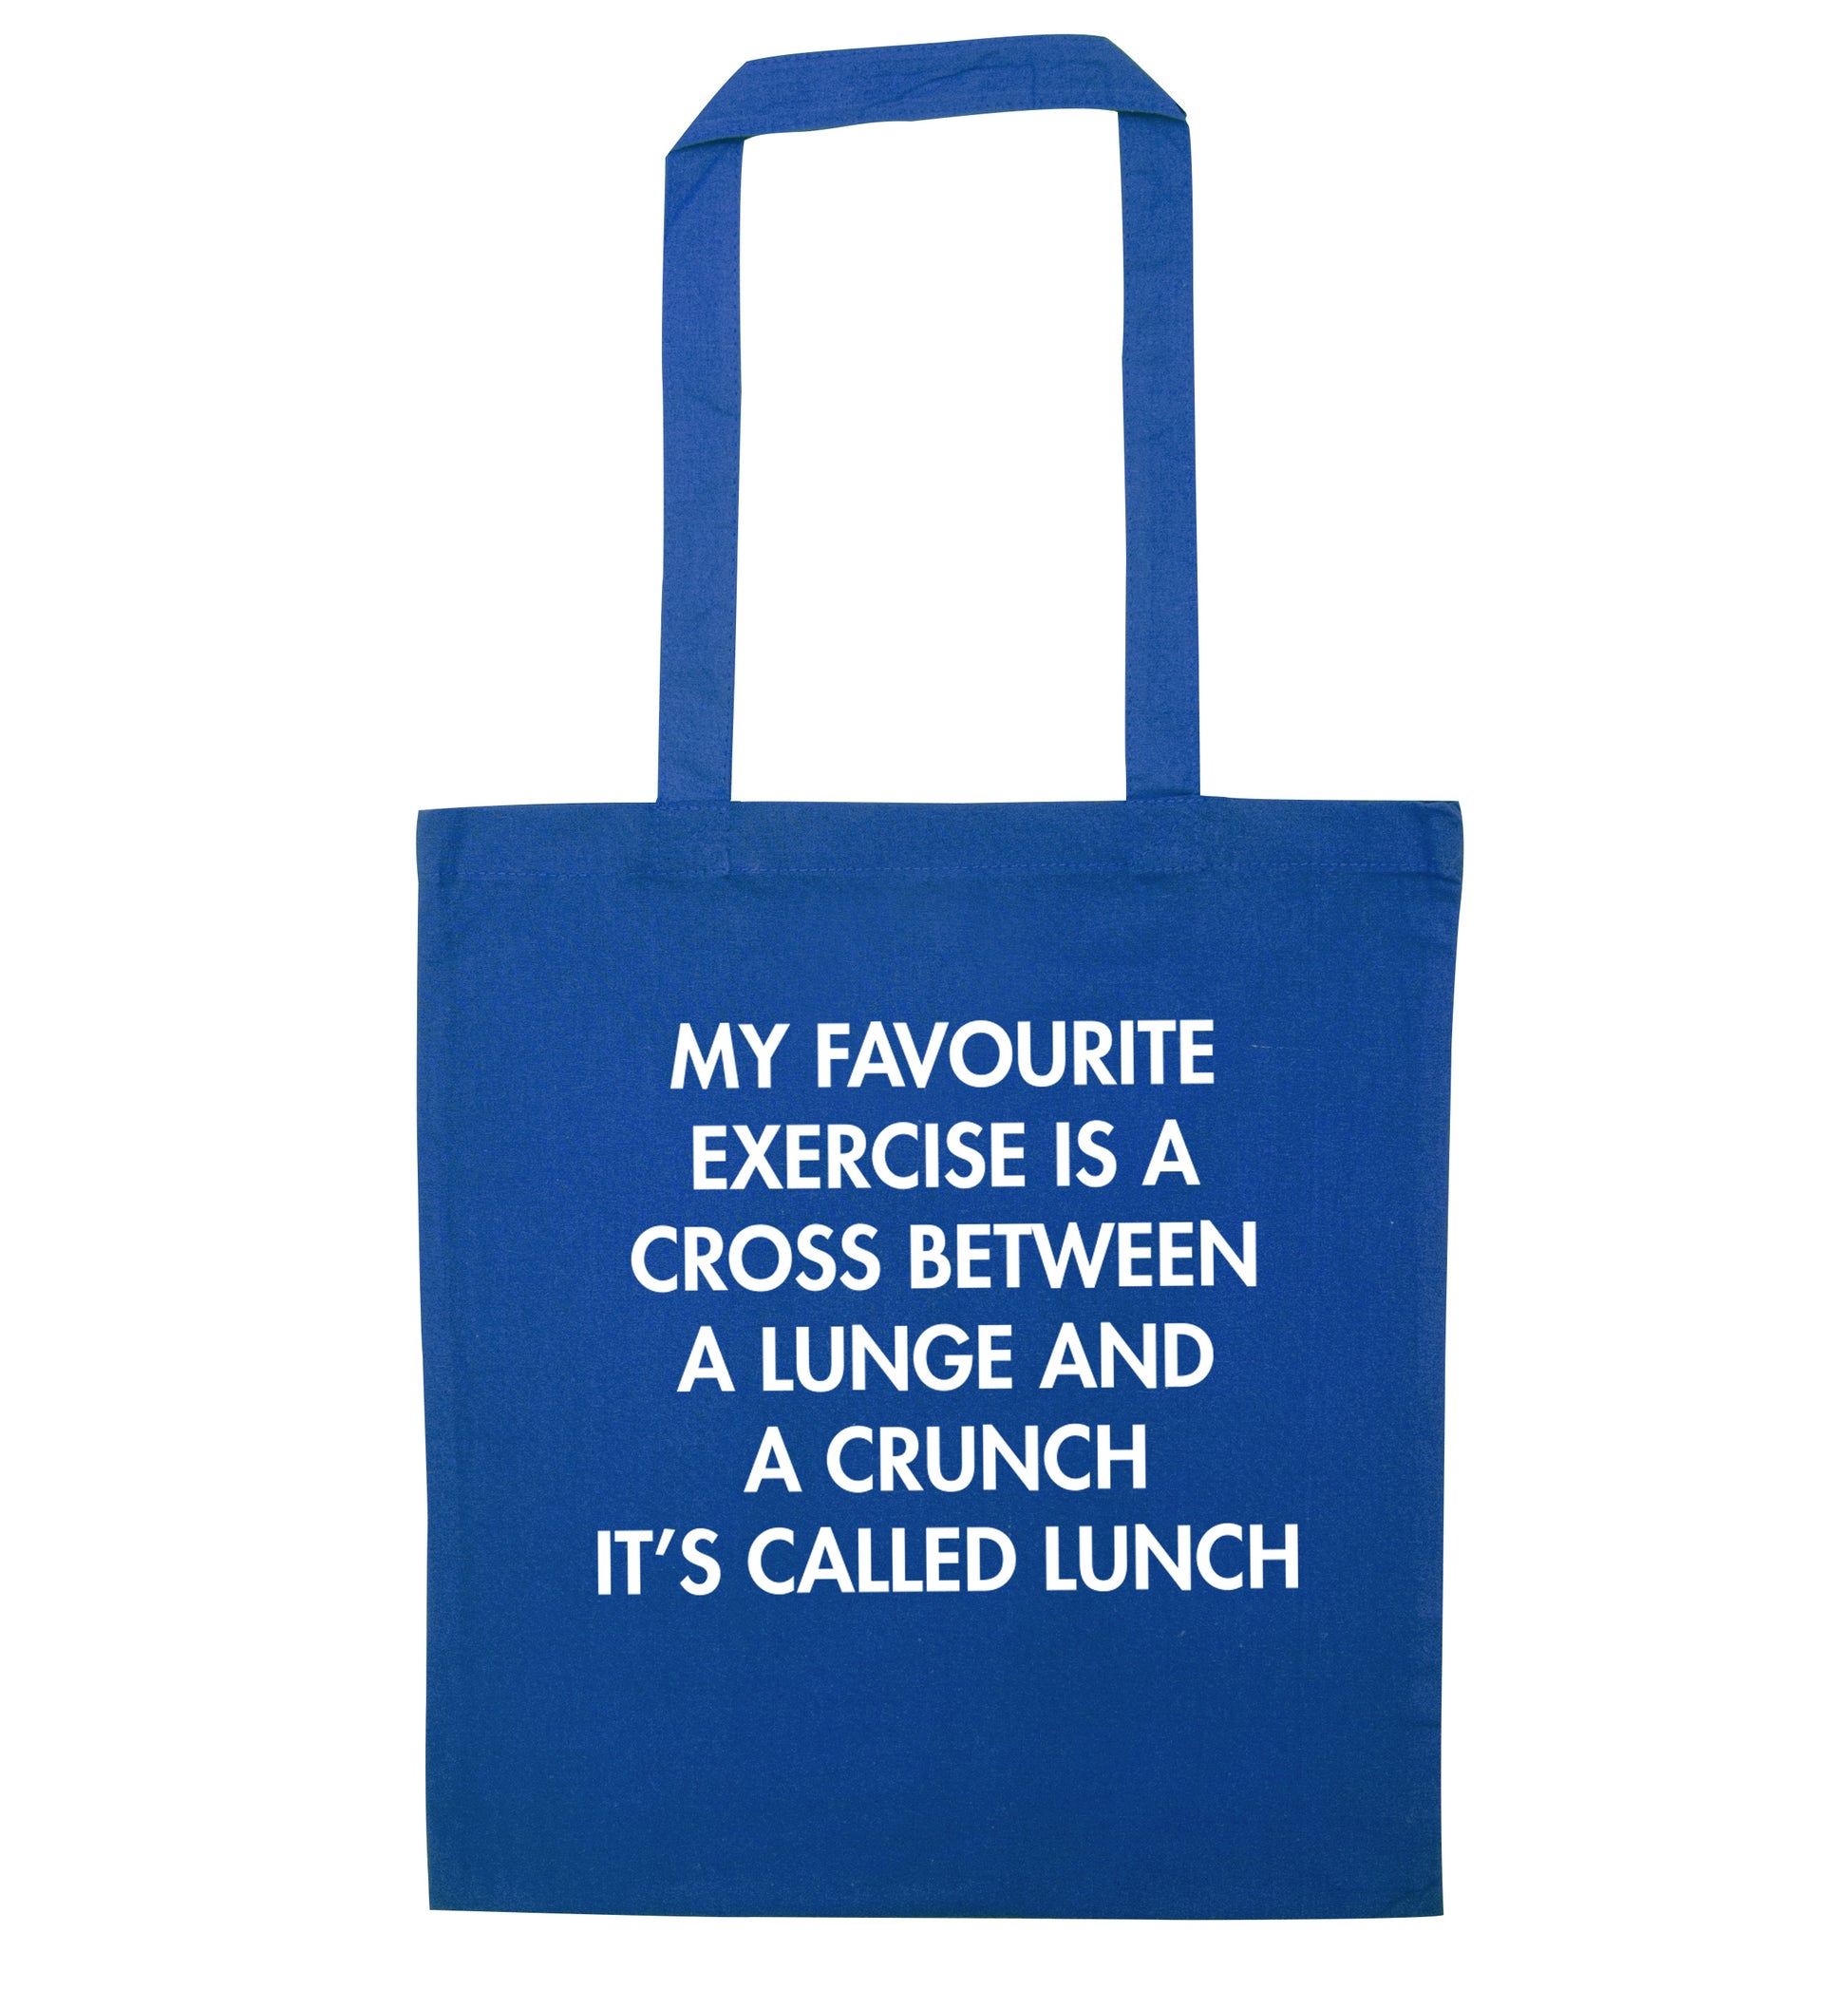 My favourite exercise is a cross between a lung and a crunch it's called lunch blue tote bag